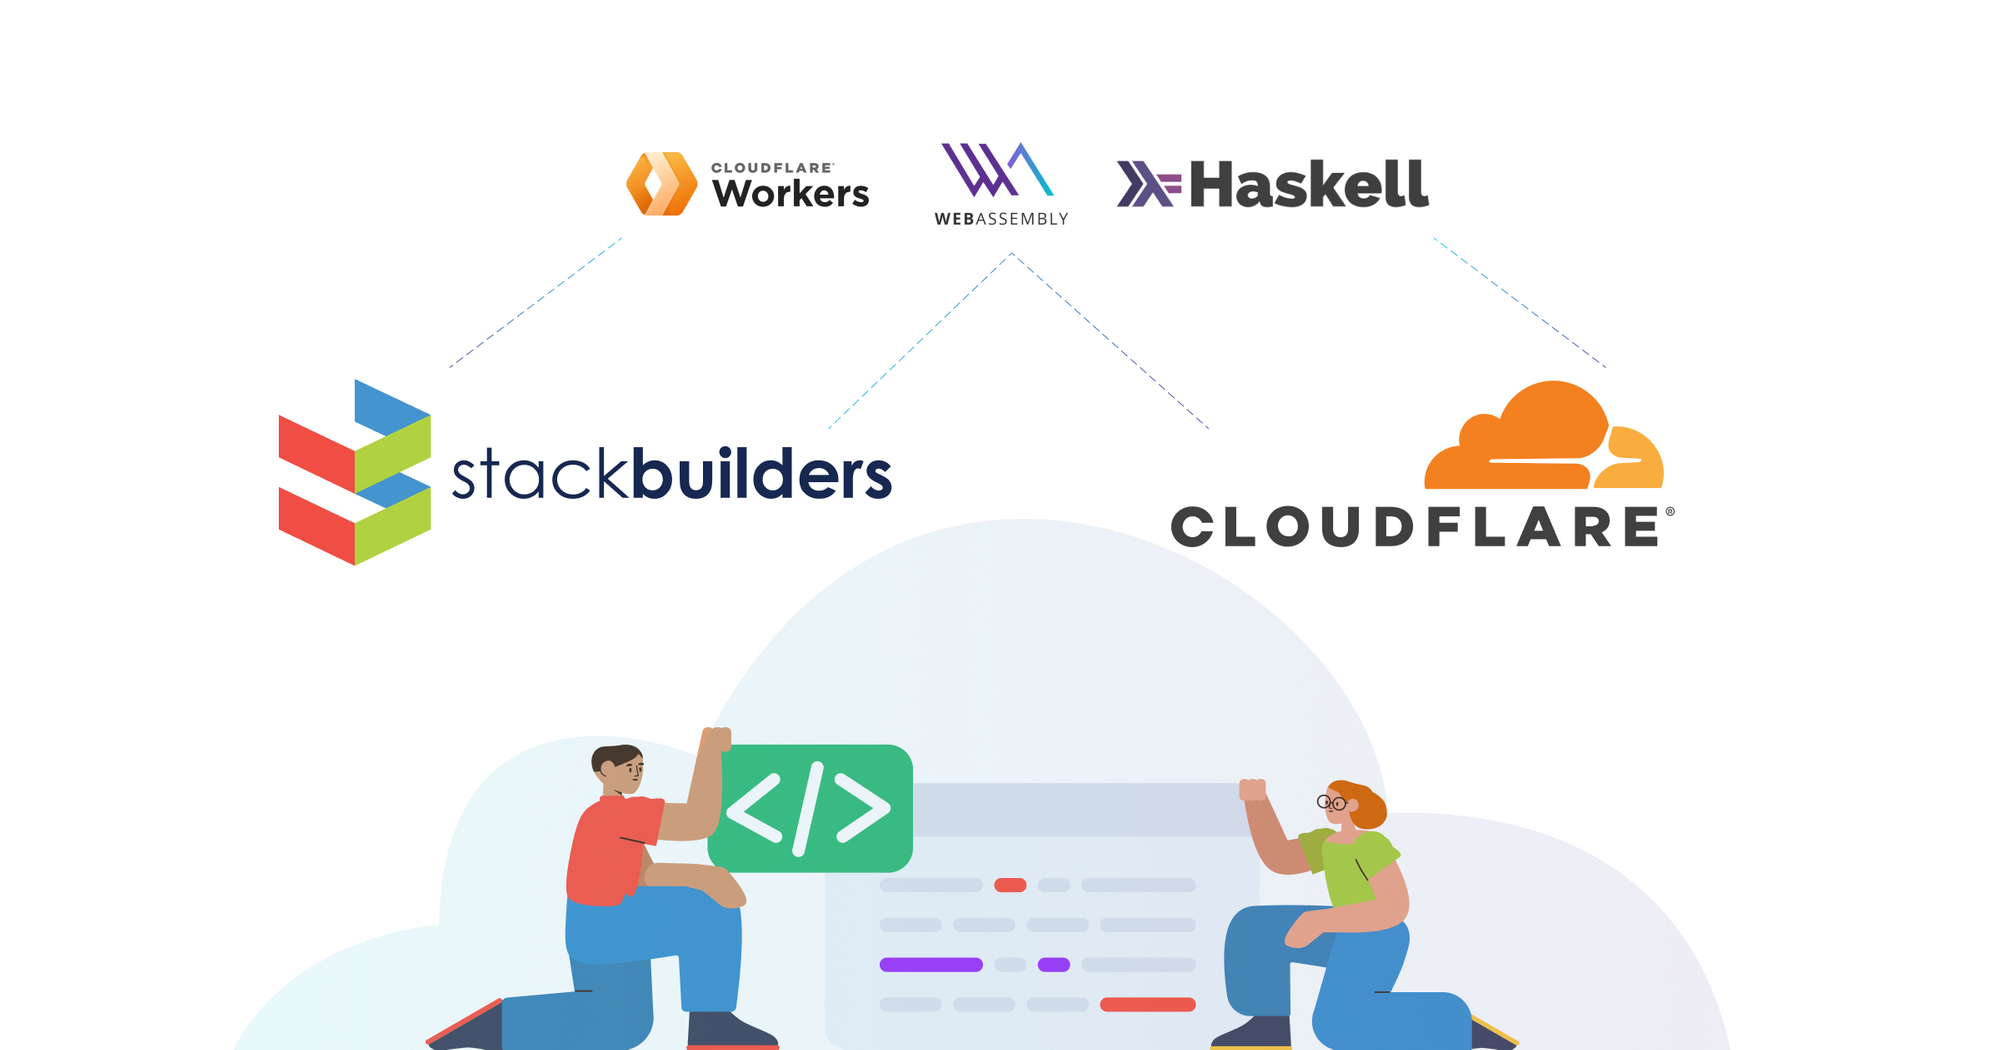 Let's build a Cloudflare Worker with WebAssembly and Haskell